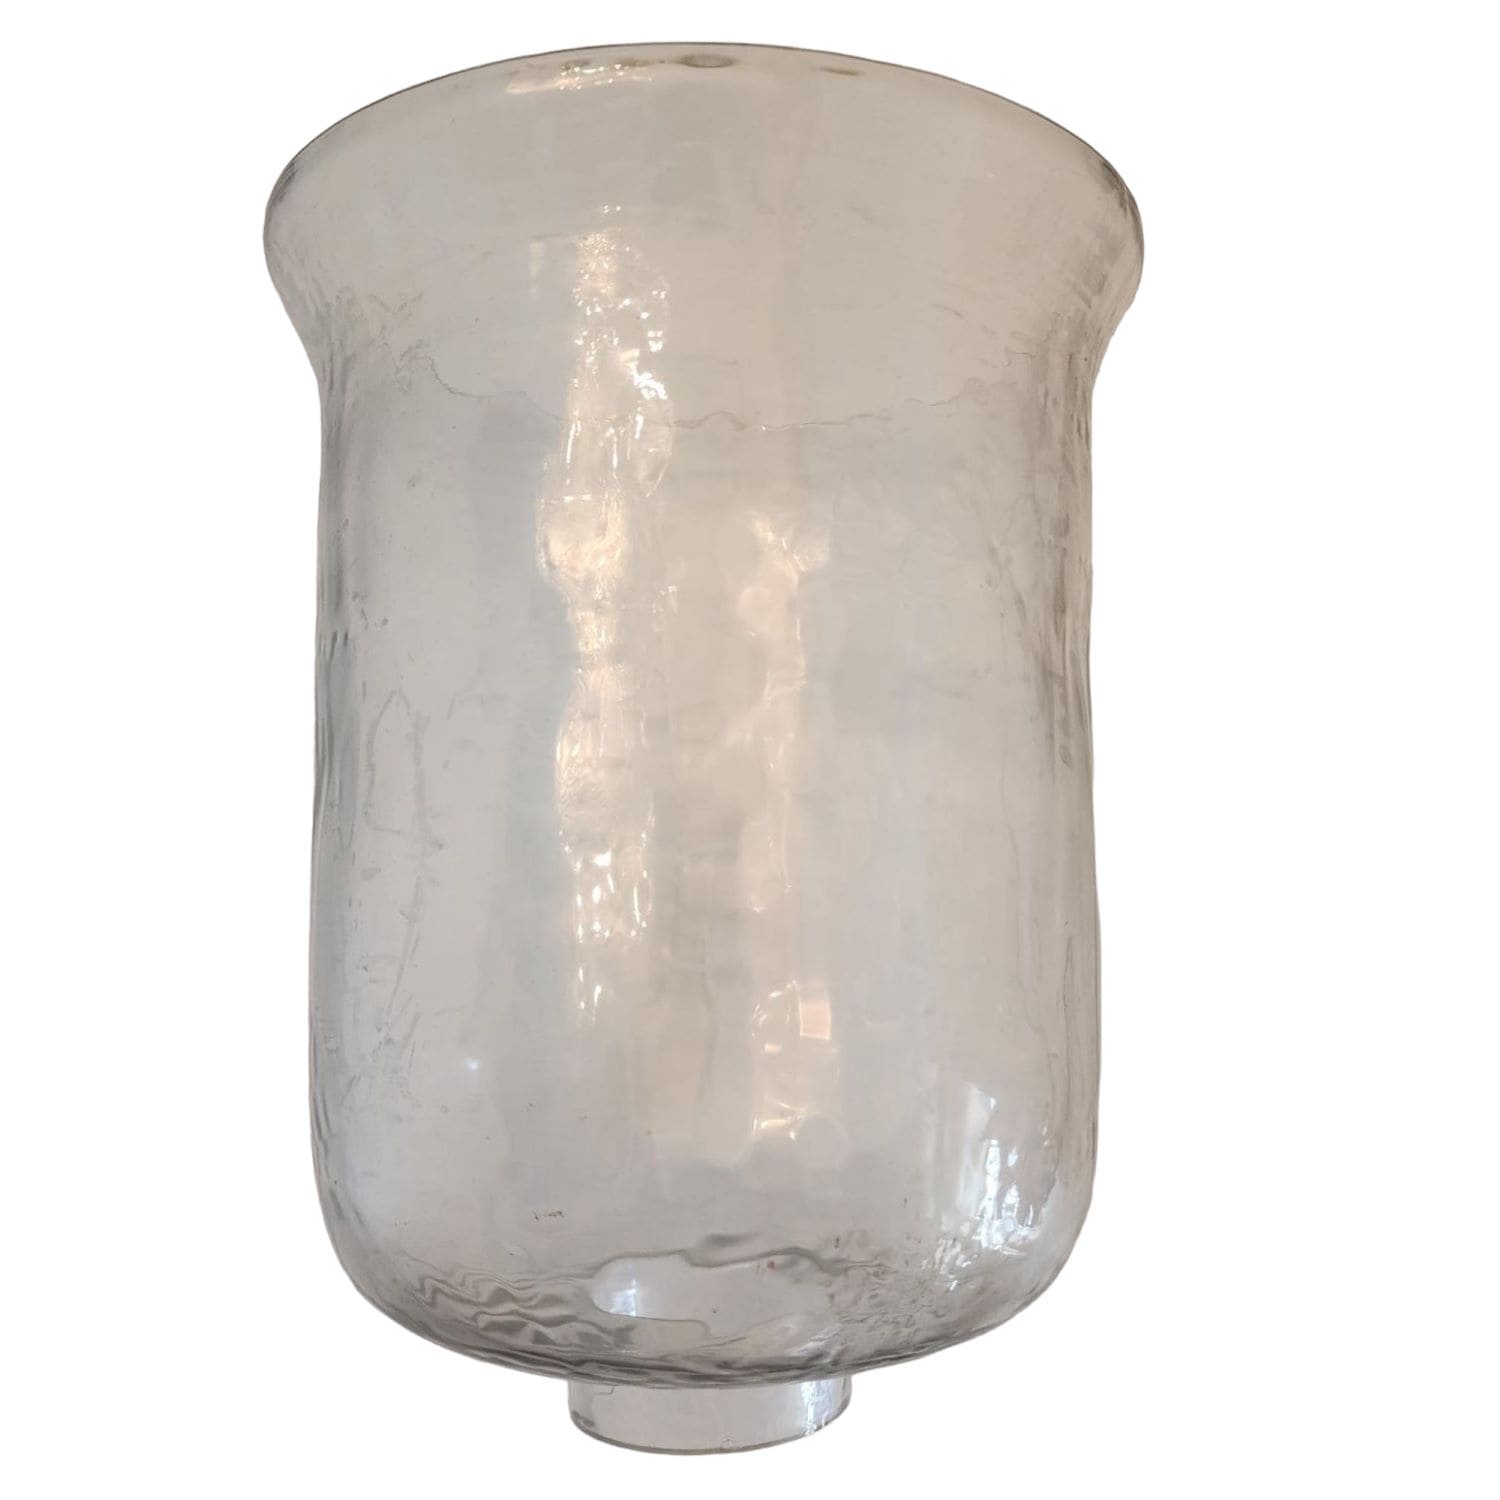 Scroll Metal Wall Sconce with Hurricane Jar - Mulberry Lane Inspirations Ambiance Wall Sconce